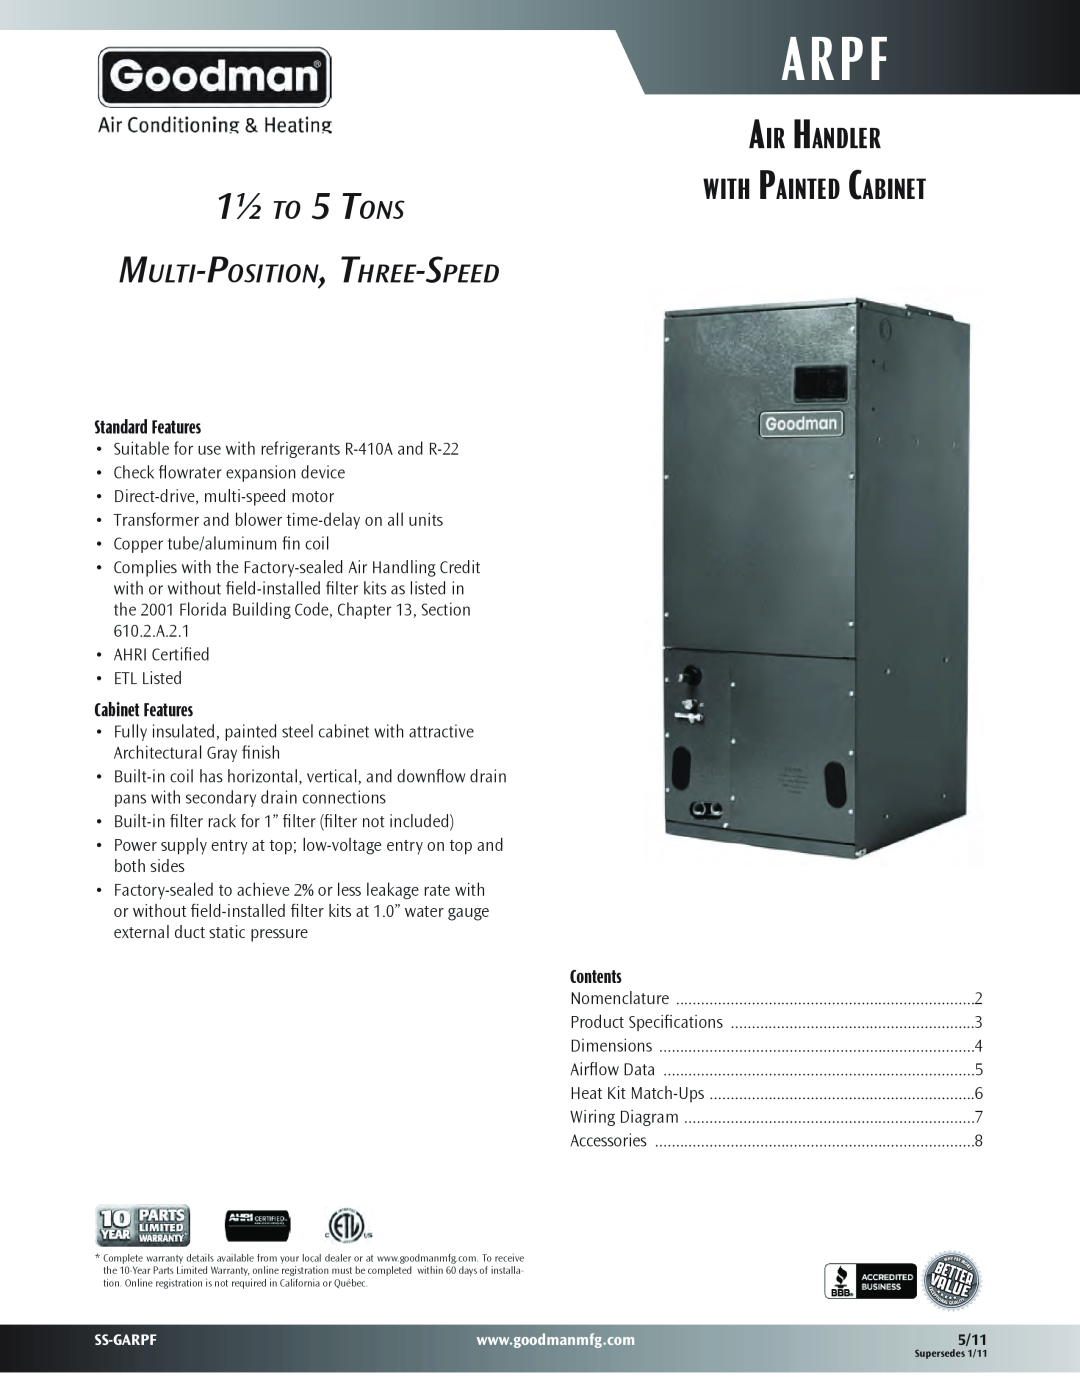 Goodman Mfg Air Handler with Painted Cabinet, SS-GARPF dimensions Standard Features, Cabinet Features, Contents, Arpf 